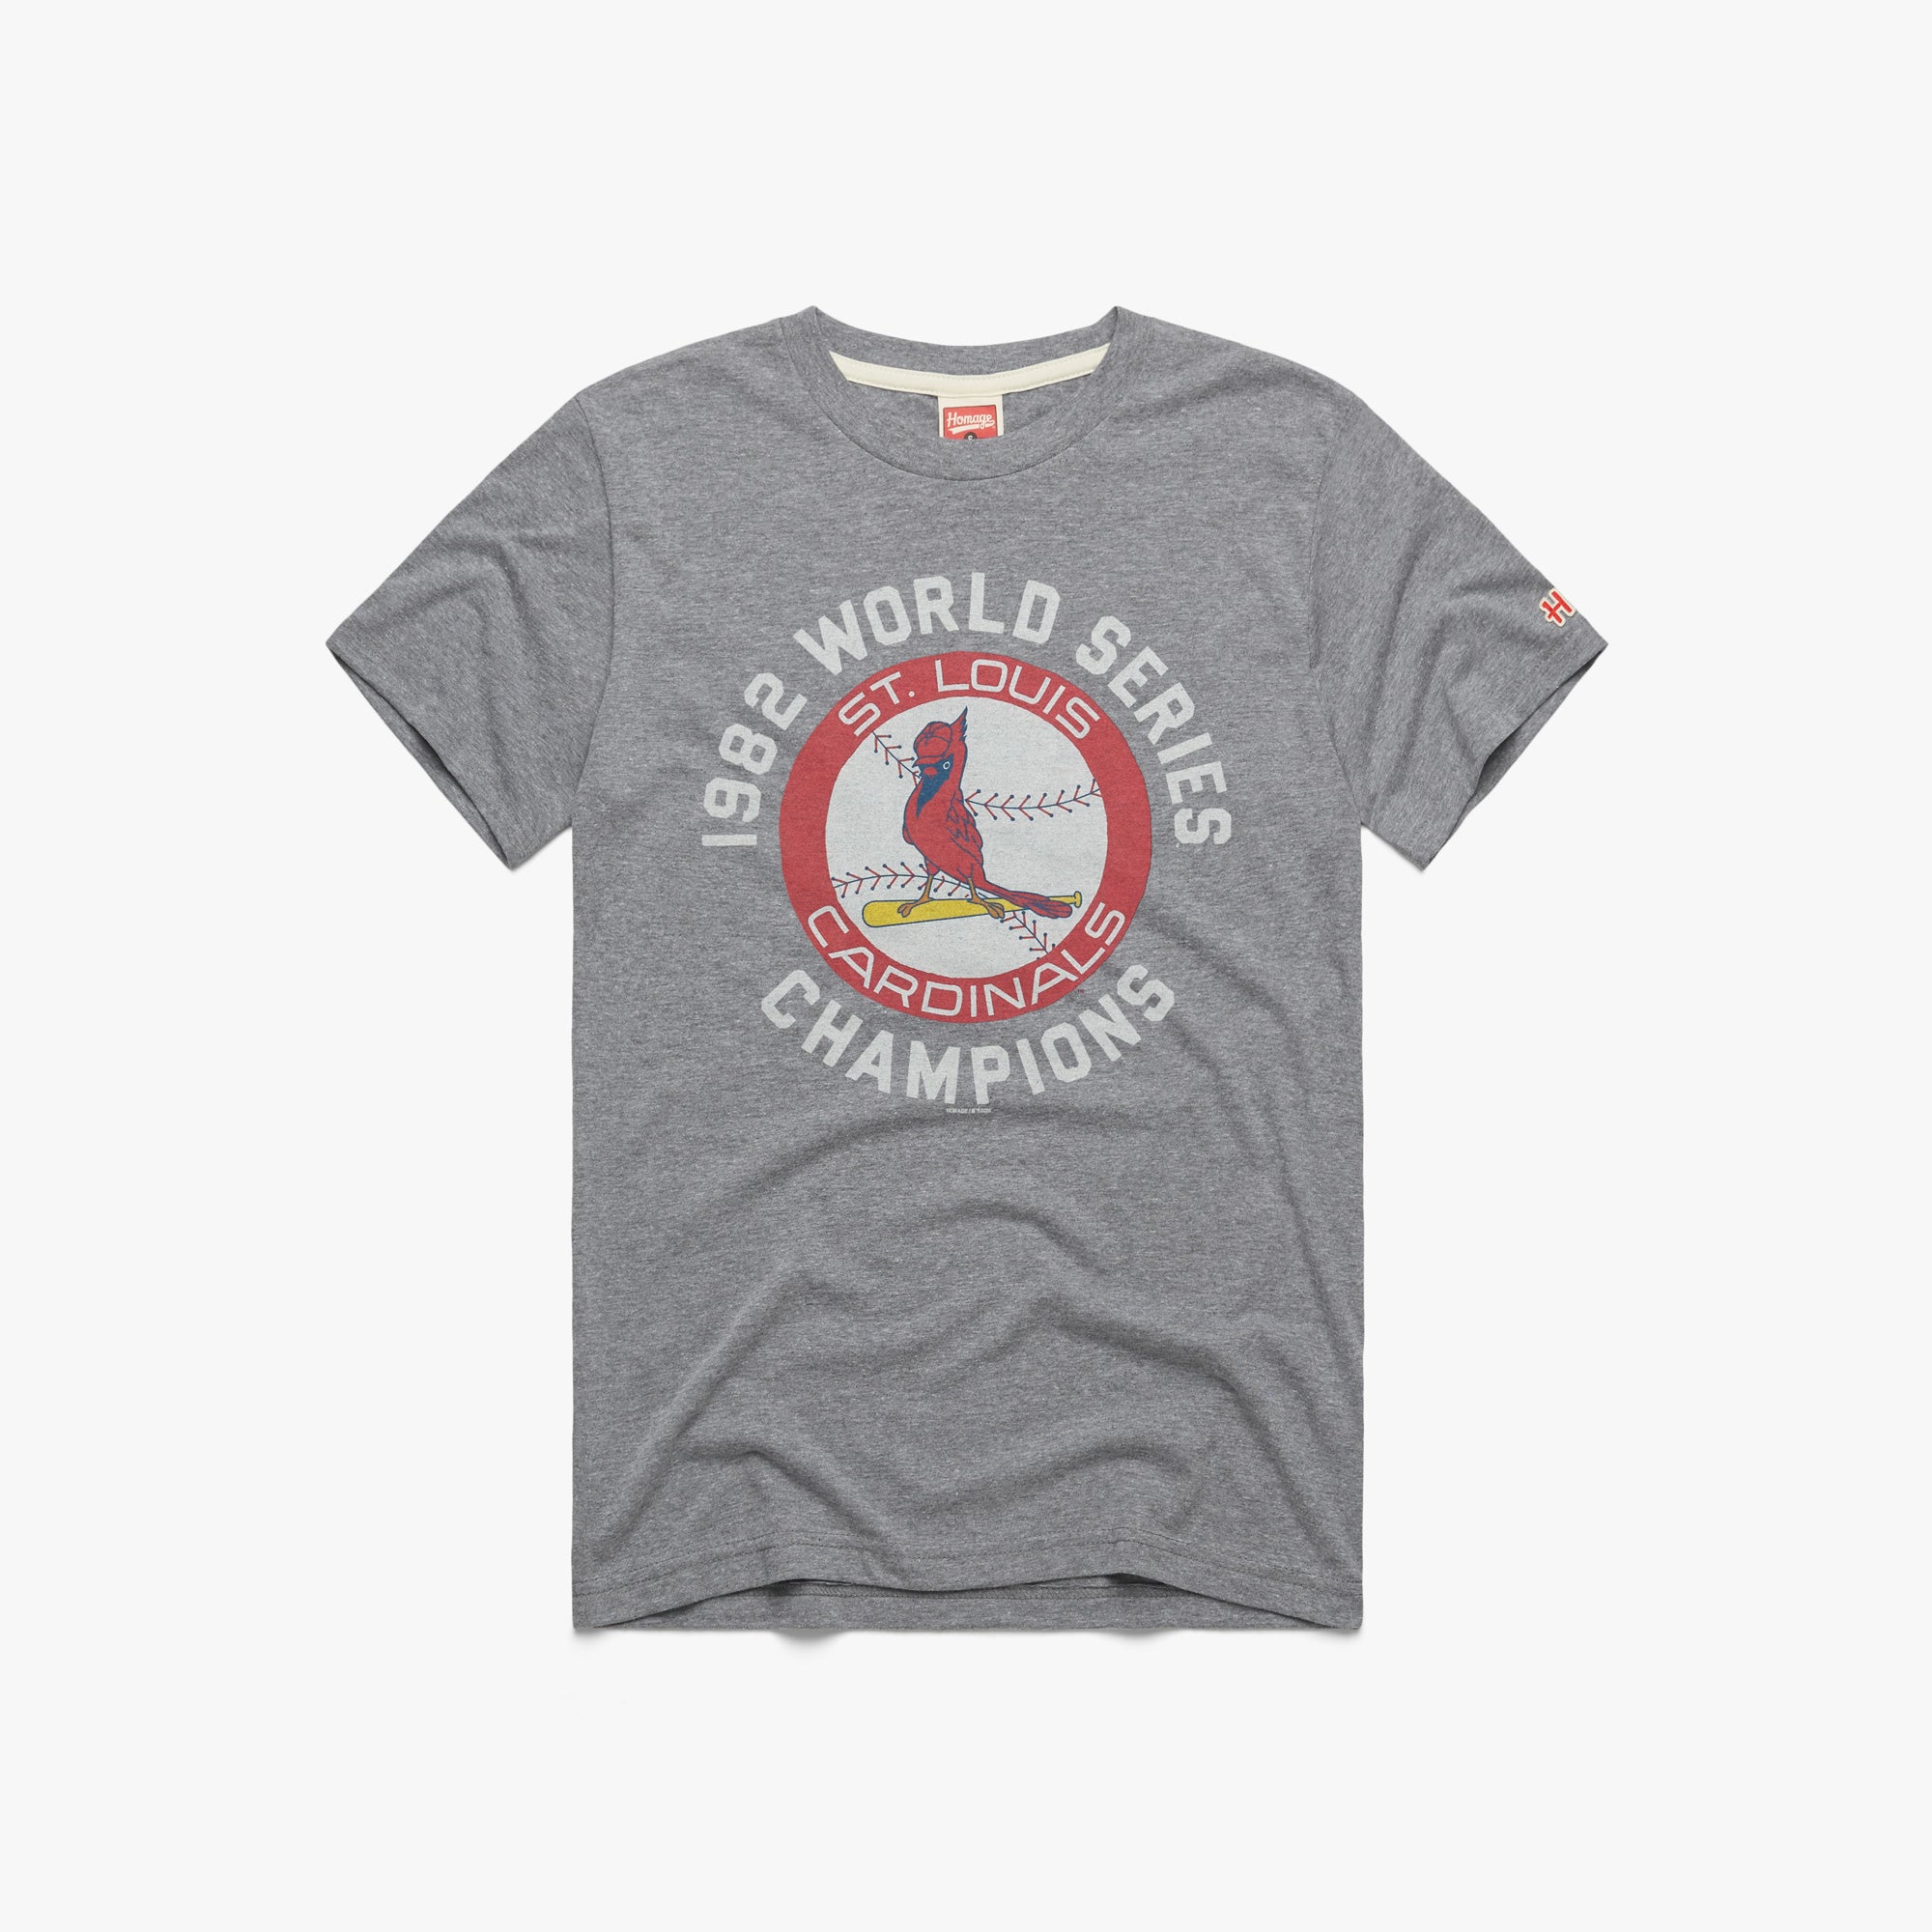 World Series Champions: St. Louis Cardinals – The Creative Company Shop